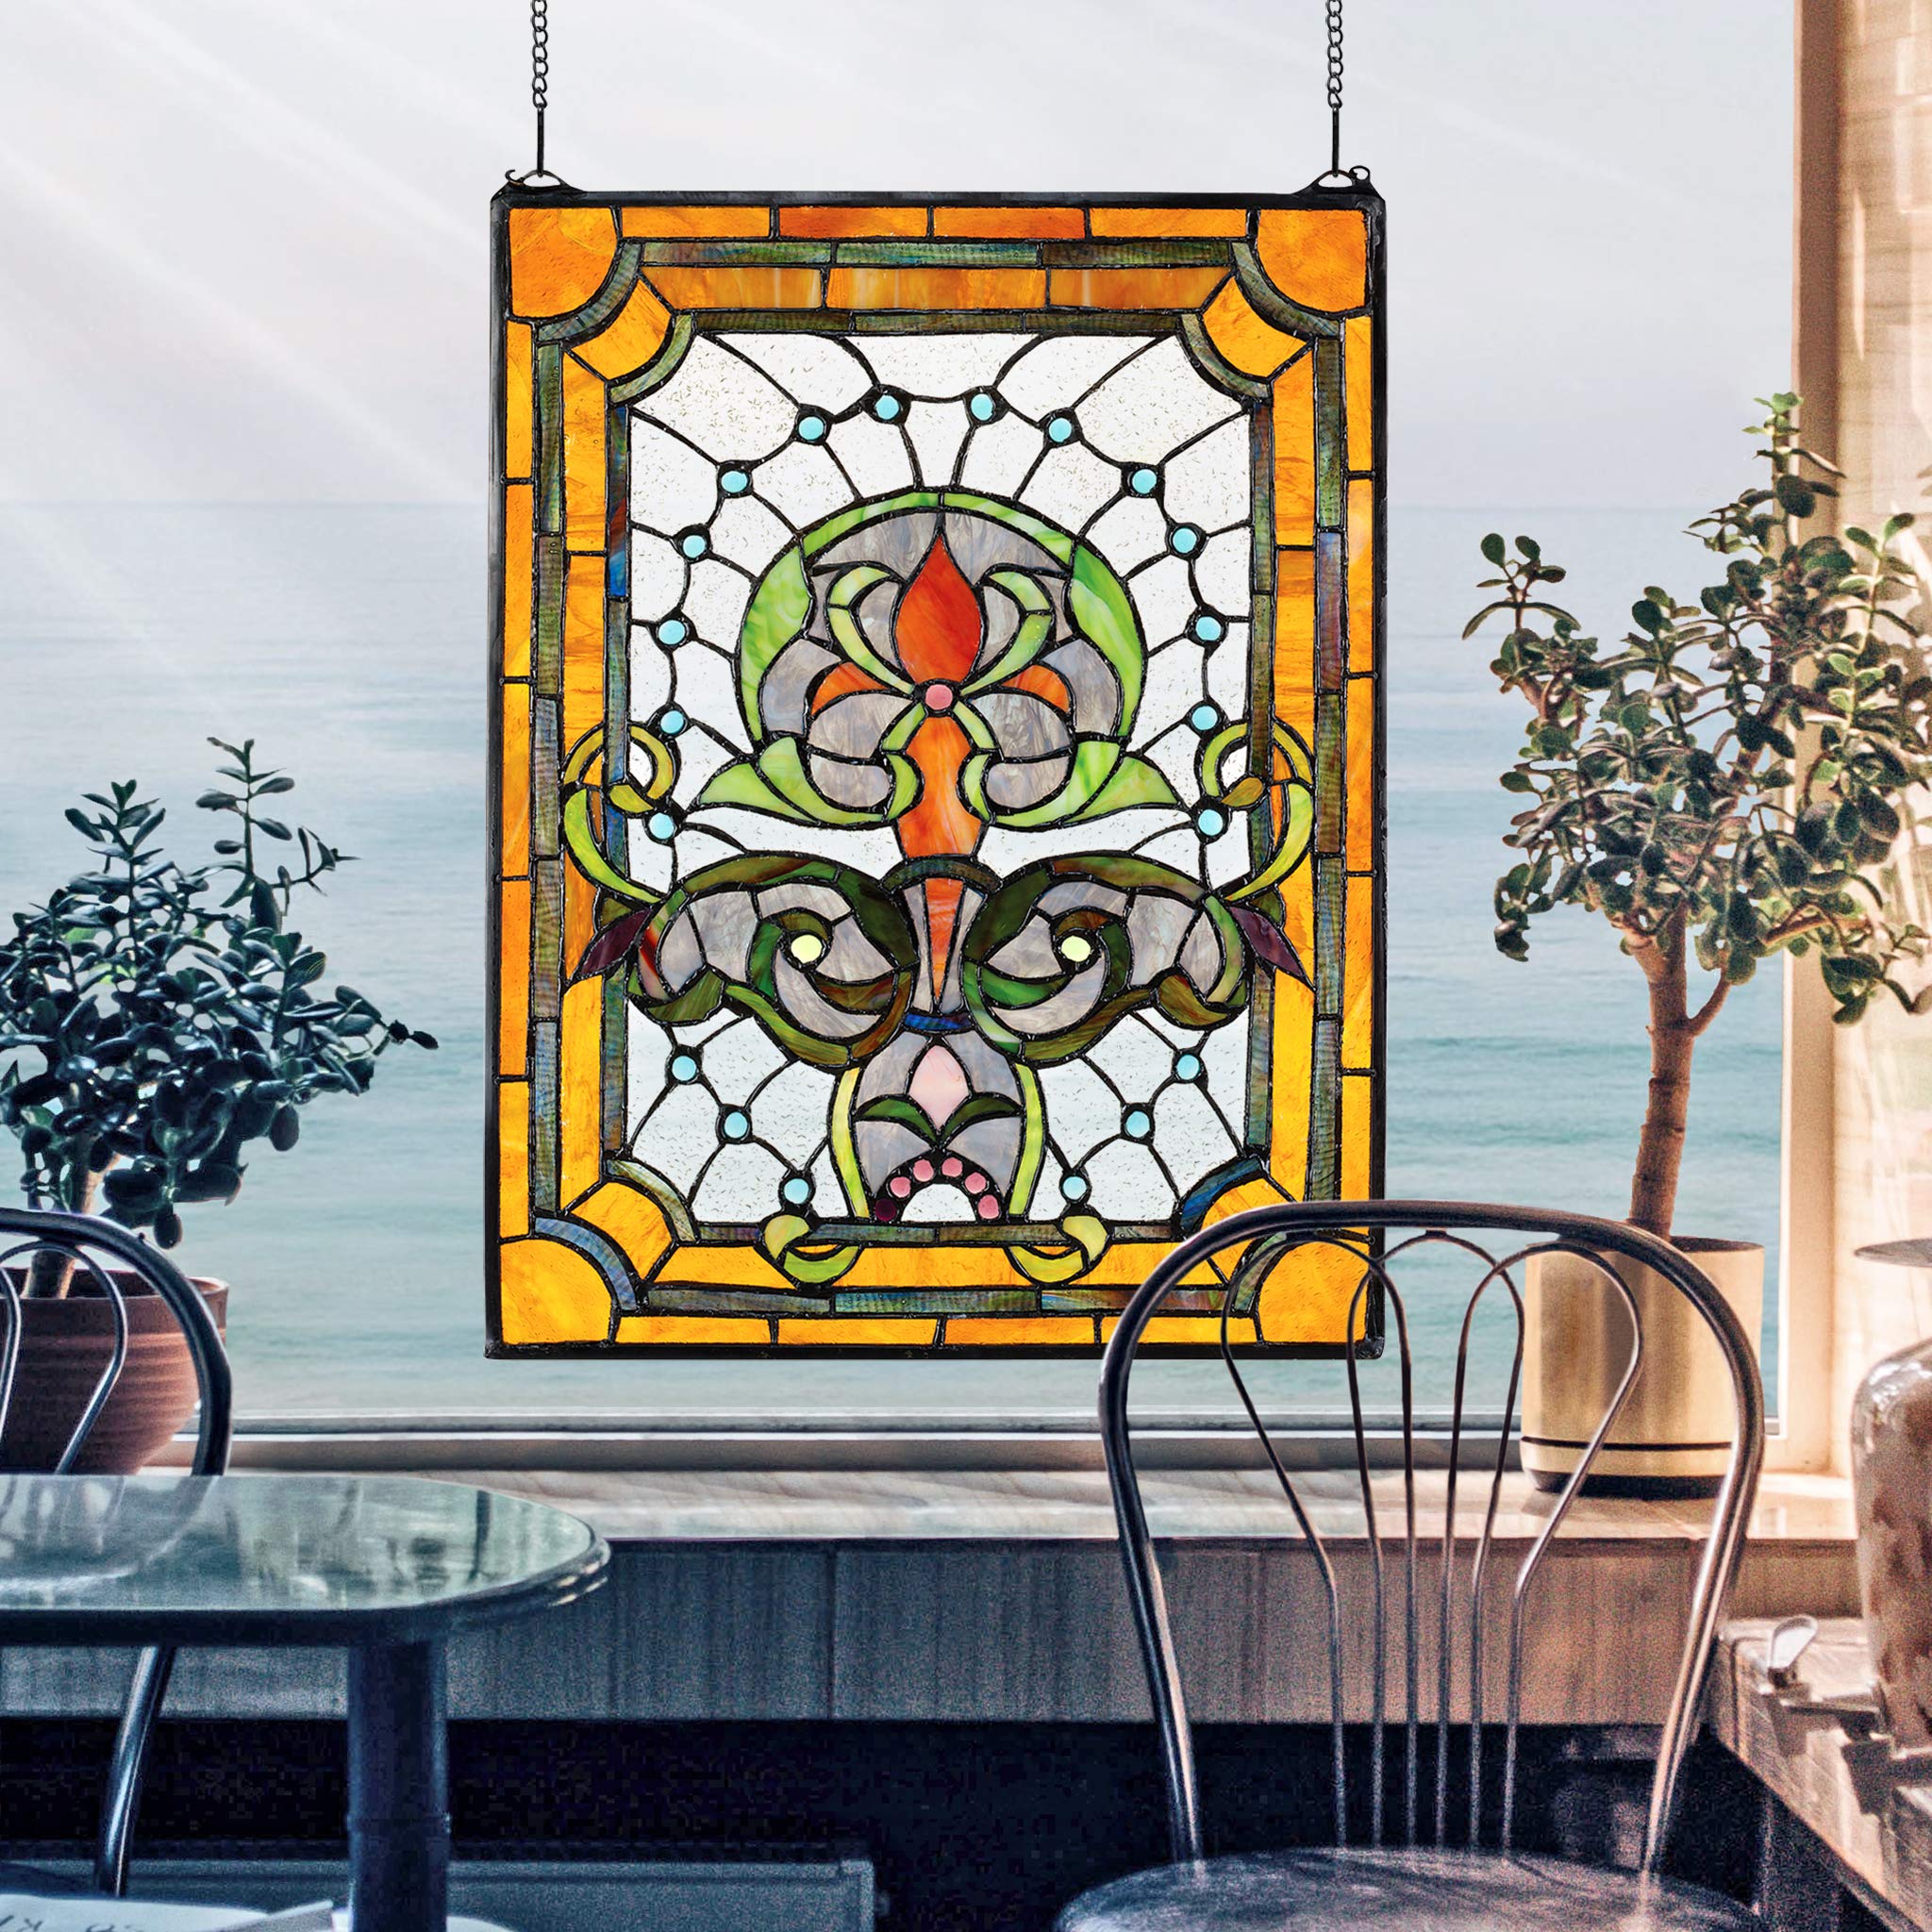 Design Toscano Kendall Manor Stained Glass Window